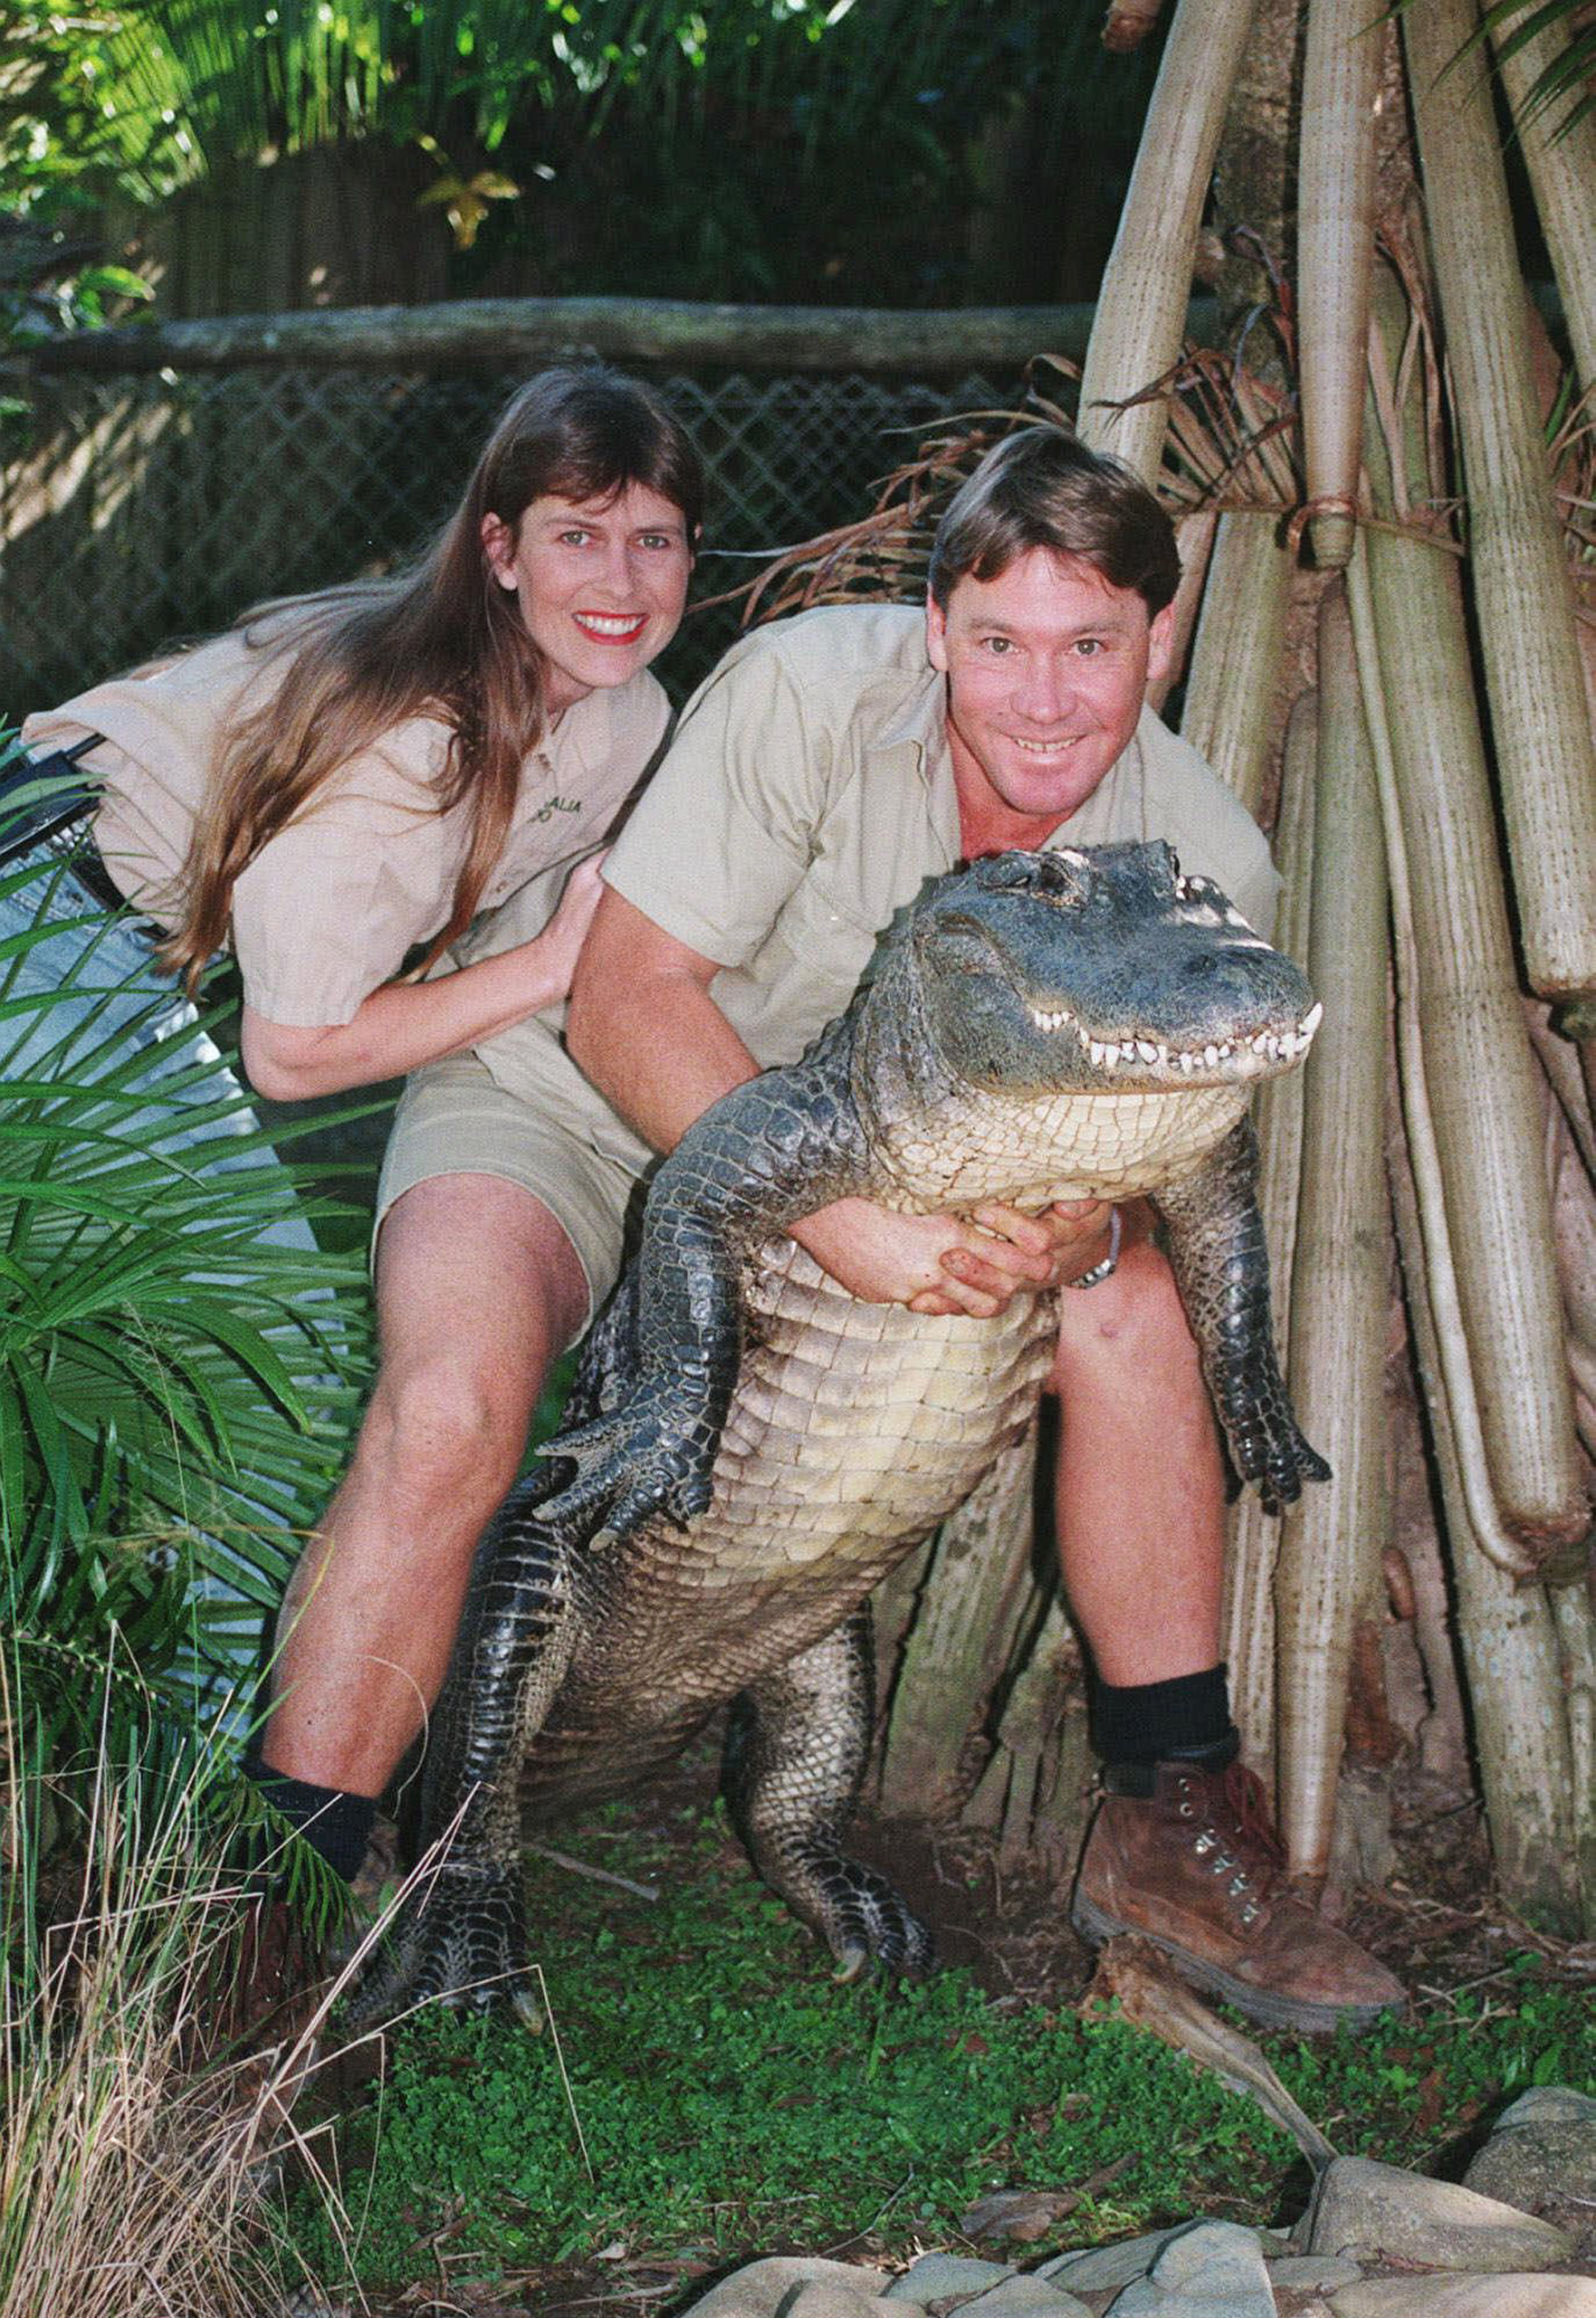 Steve Irwin and his wife Terri seen at their "Australia Zoo" in Beerwah, Australia, in this June 18, 1999 file photo holding a nine-foot female alligator in company with his American wife Terri. Irwin, the Australian television personality and environmentalist known as the Crocodile Hunter, was killed Monday Sept. 4, 2006 by a stingray barb during a diving expedition, media reports said. (AP Photo/Russell McPhedran, File)